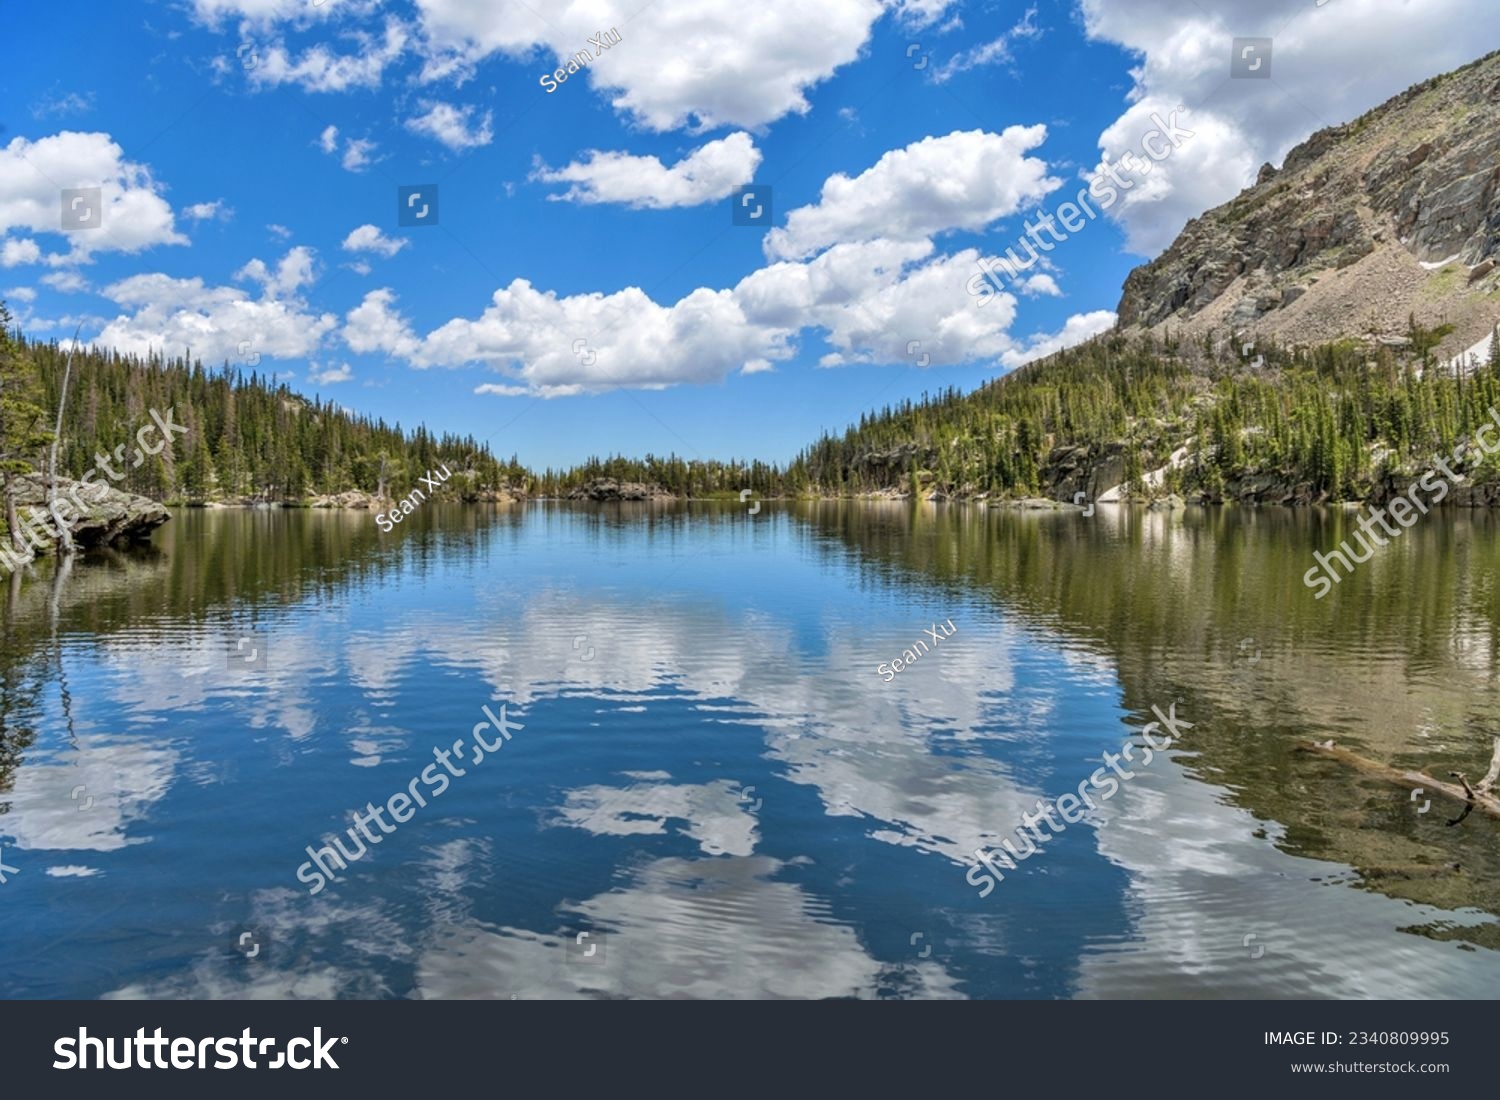 The Loch - A summer day view of blue sky and white clouds reflecting in calm mountain lake - The Loch, as seen from west end of the lake towards to its east outlet. Rocky Mountain National Park, CO. #2340809995